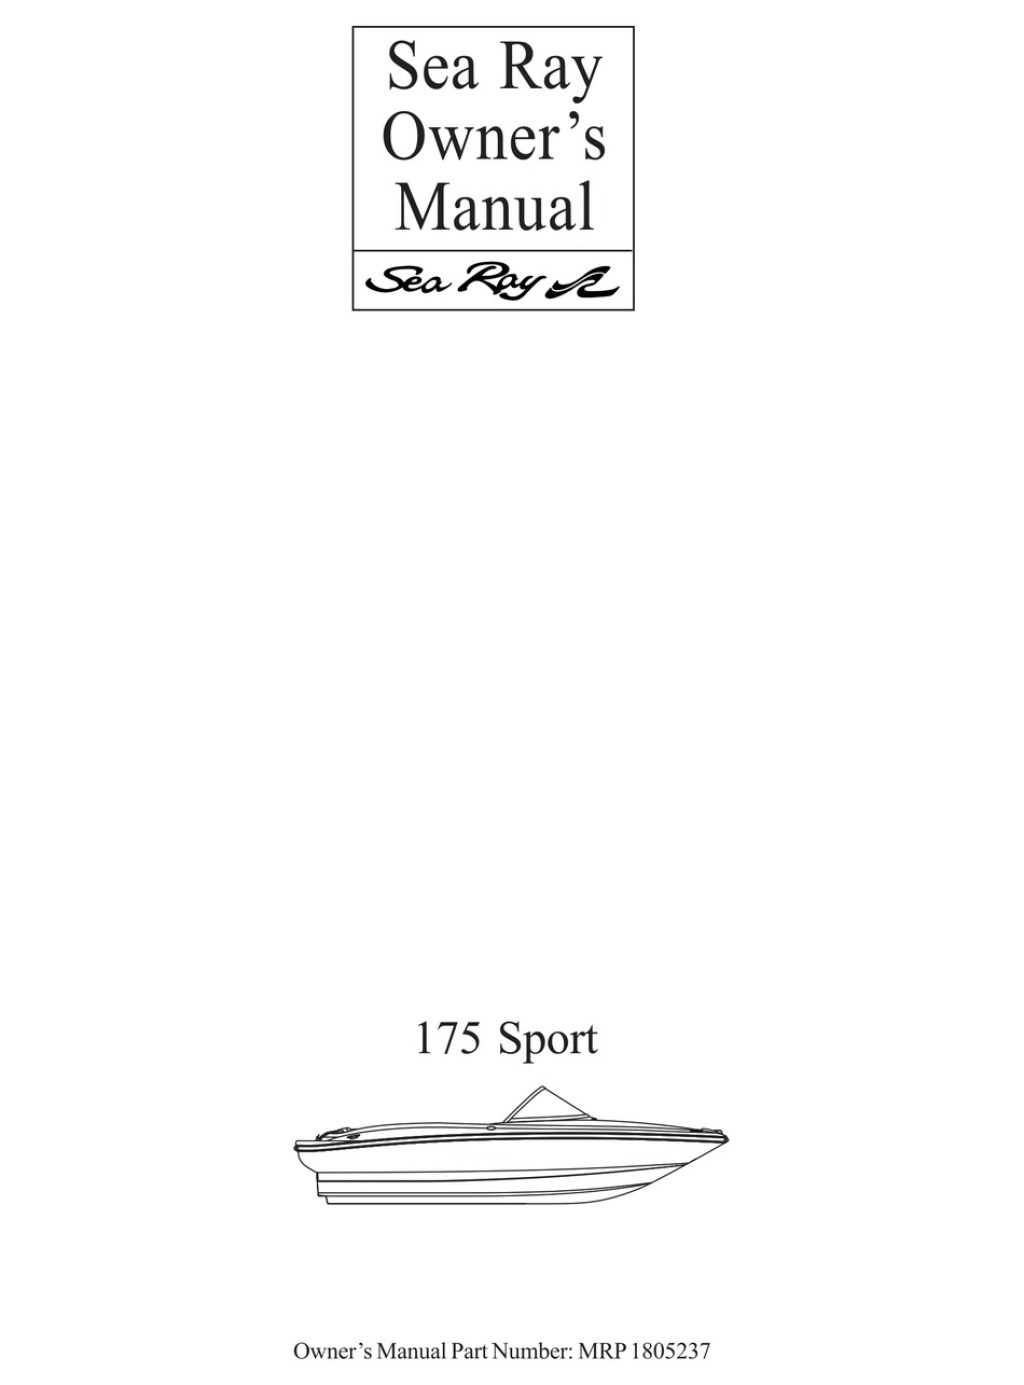 Picture of: SEA RAY  SPORT OWNER’S MANUAL Pdf Download  ManualsLib